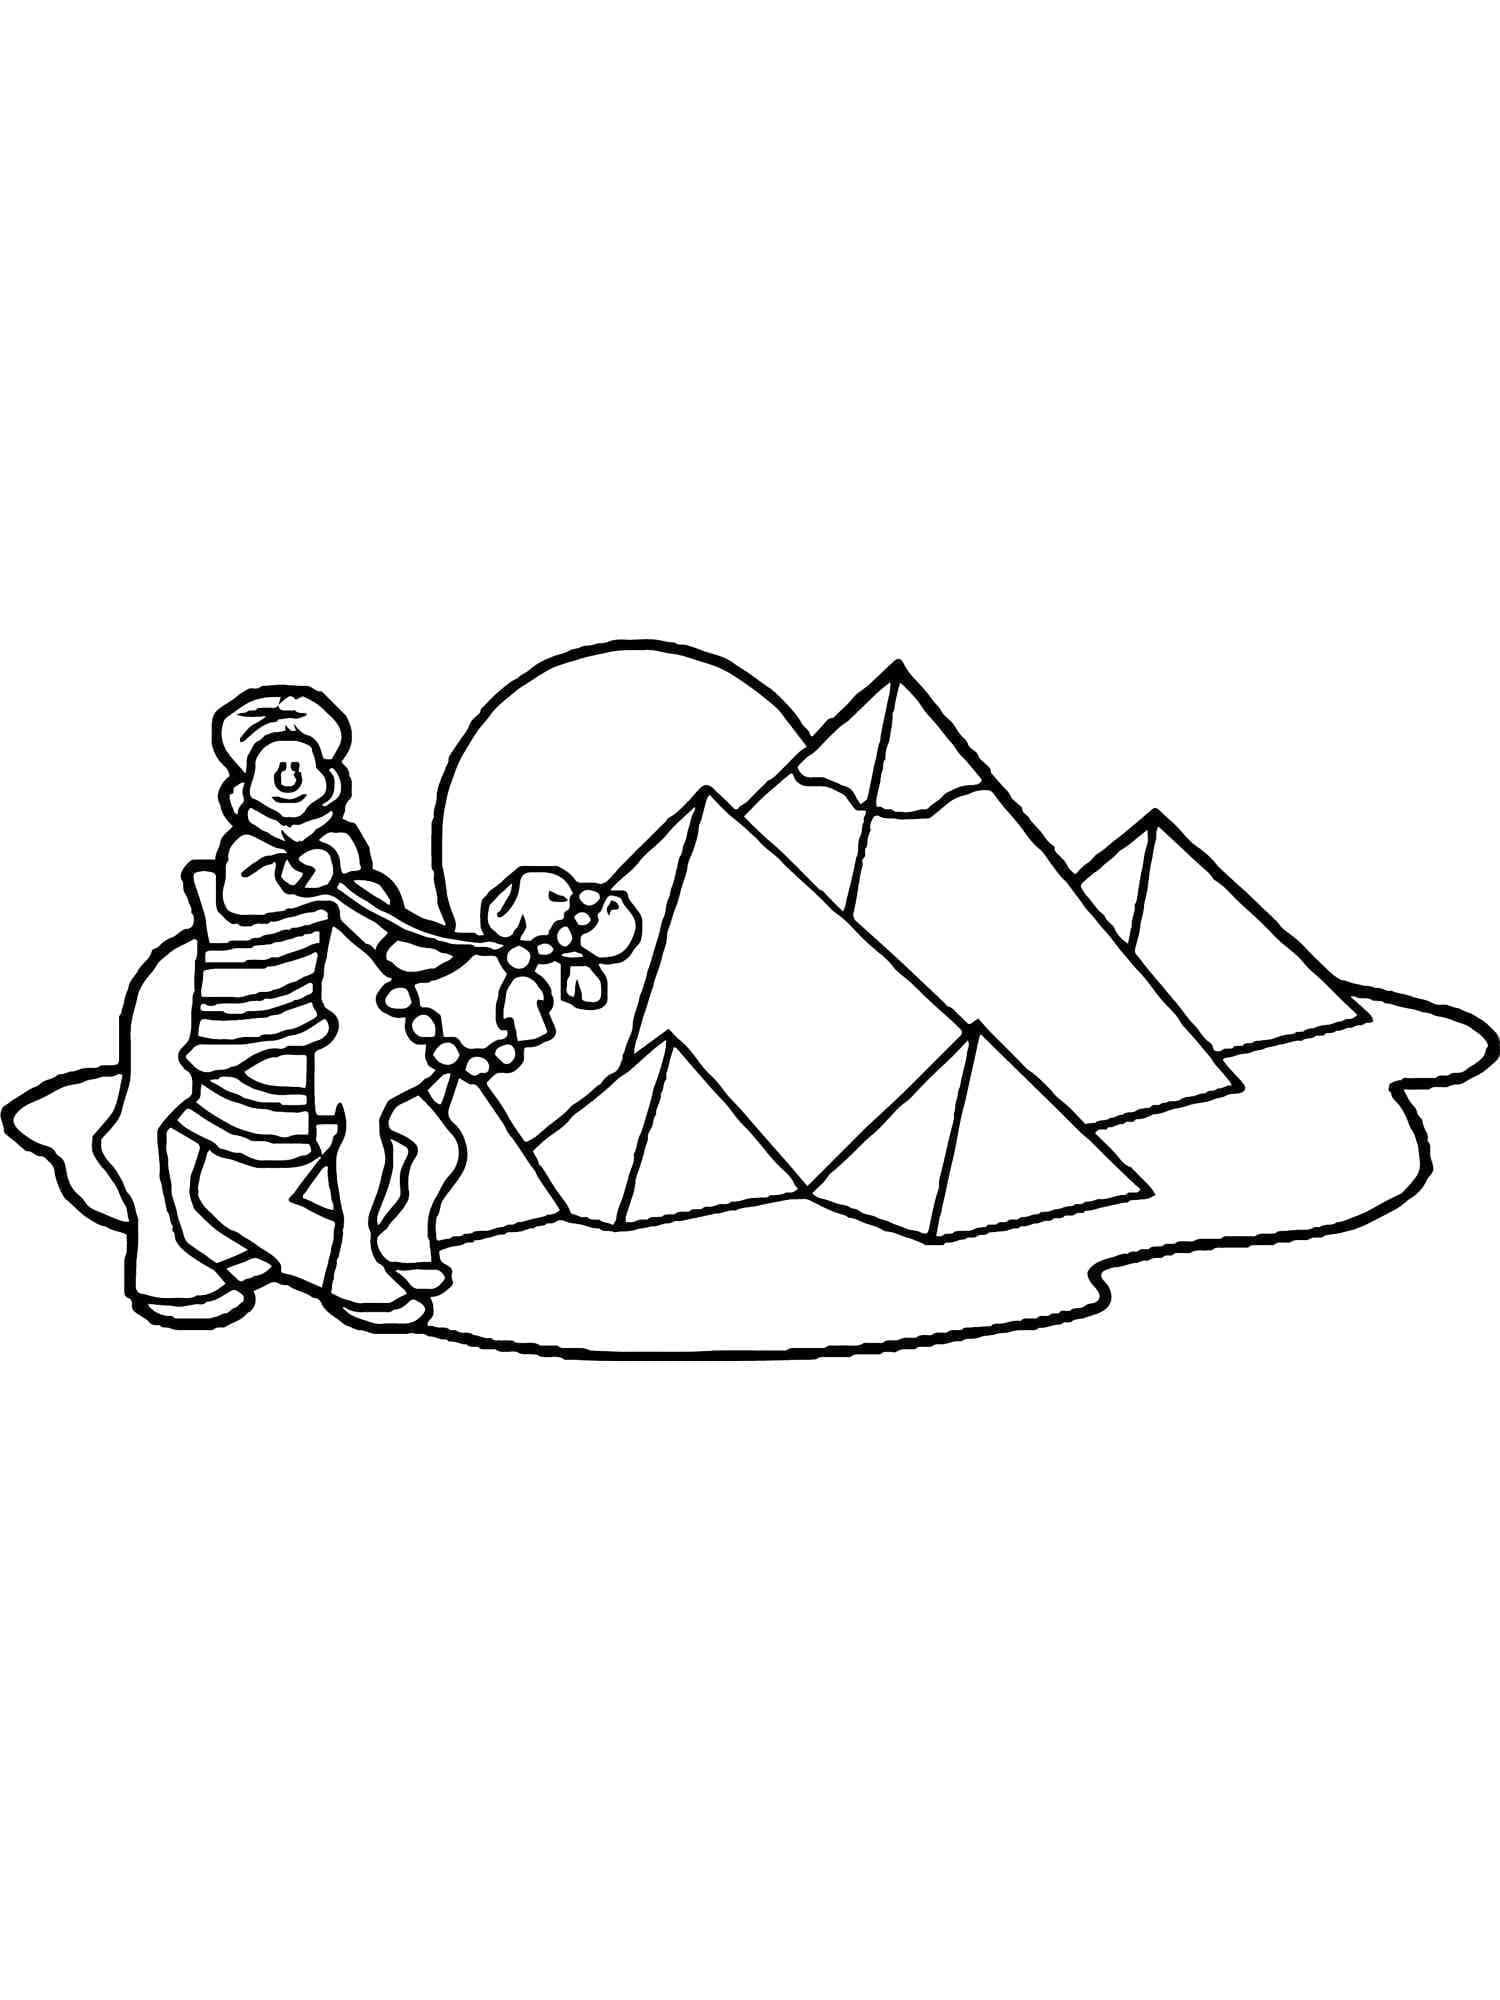 Coloriage Imprimable Pyramides